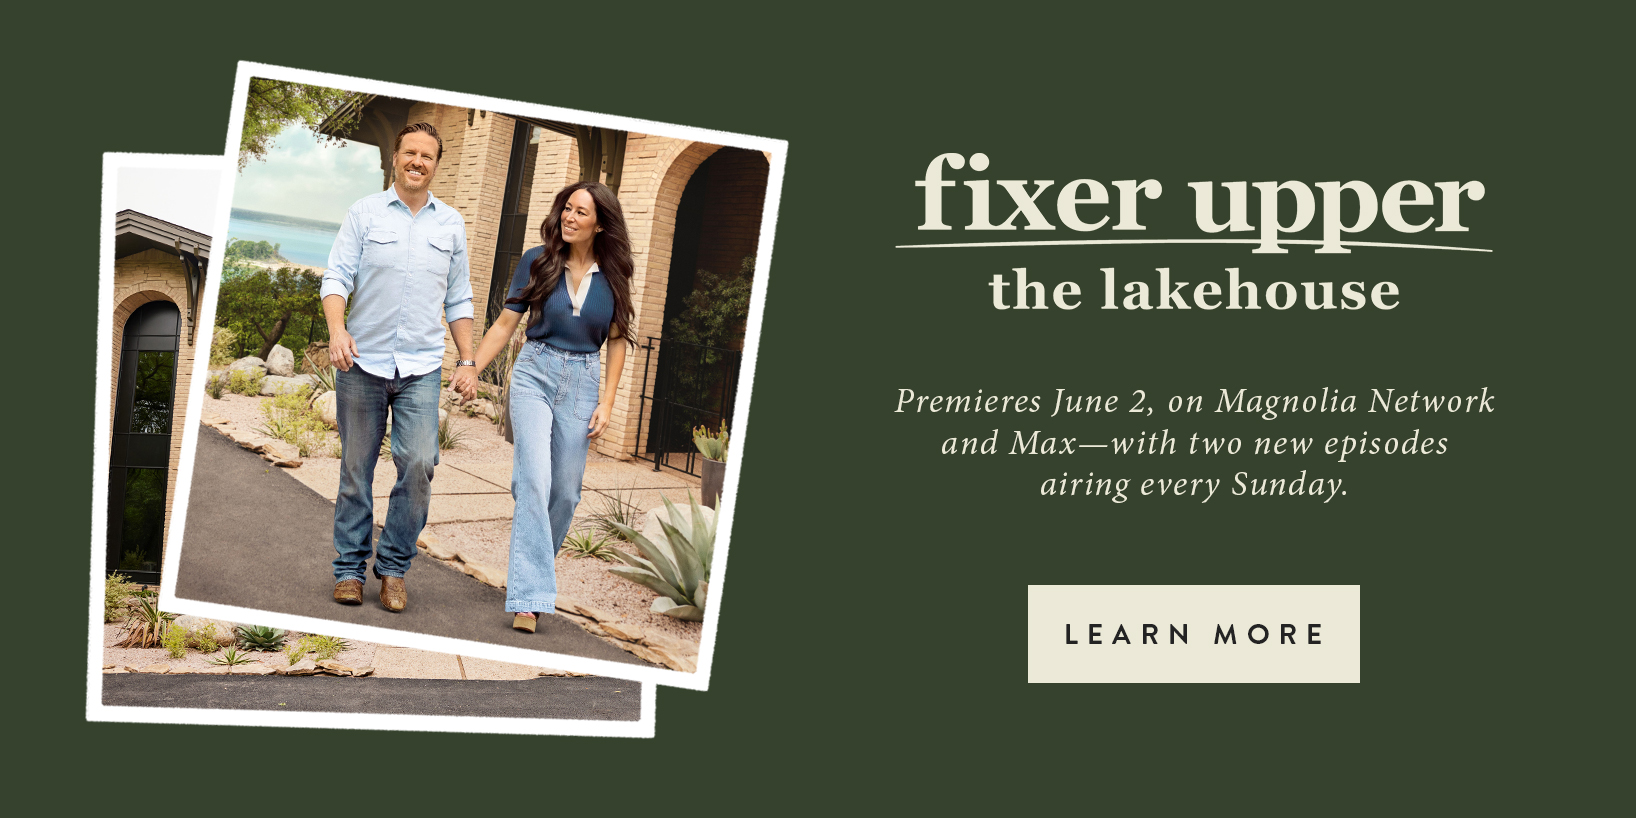 Fixer Upper the Lakehouse premieres june 2 on magnolia network and max with new episodes airing every sunday